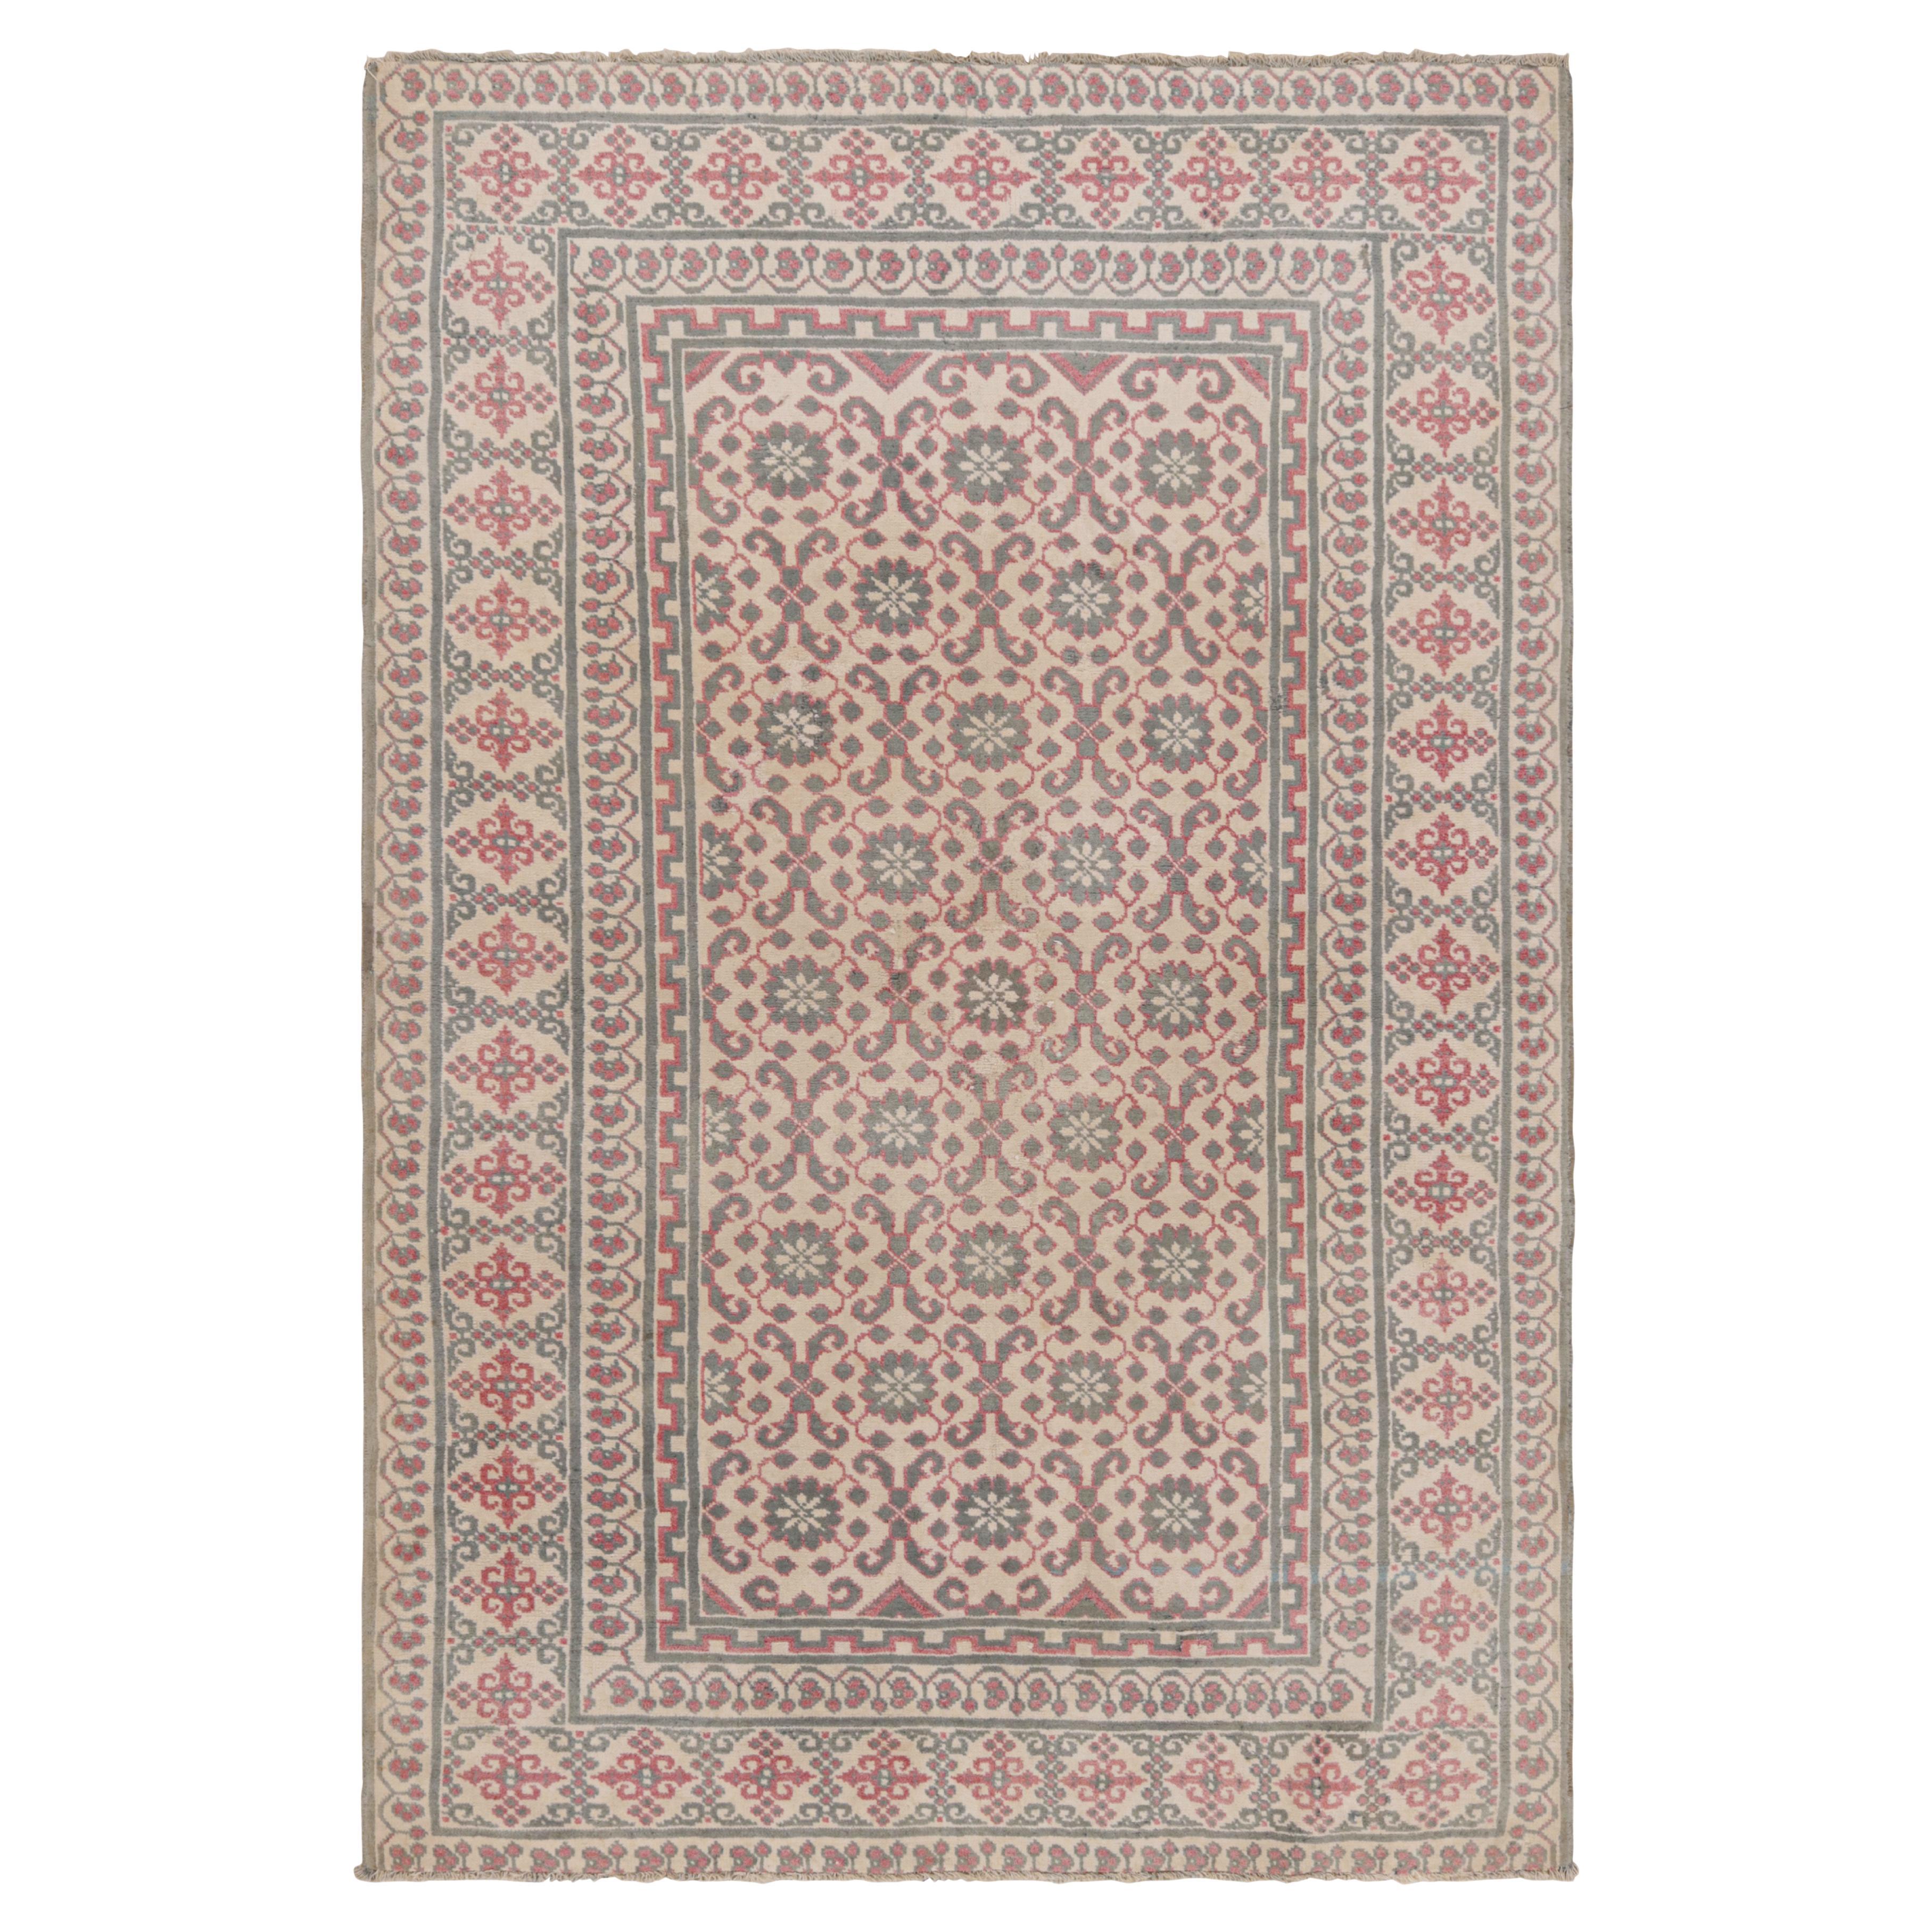 Antique Agra Rug in Cream with Gray and Red Floral Patterns, from Rug & Kilim For Sale